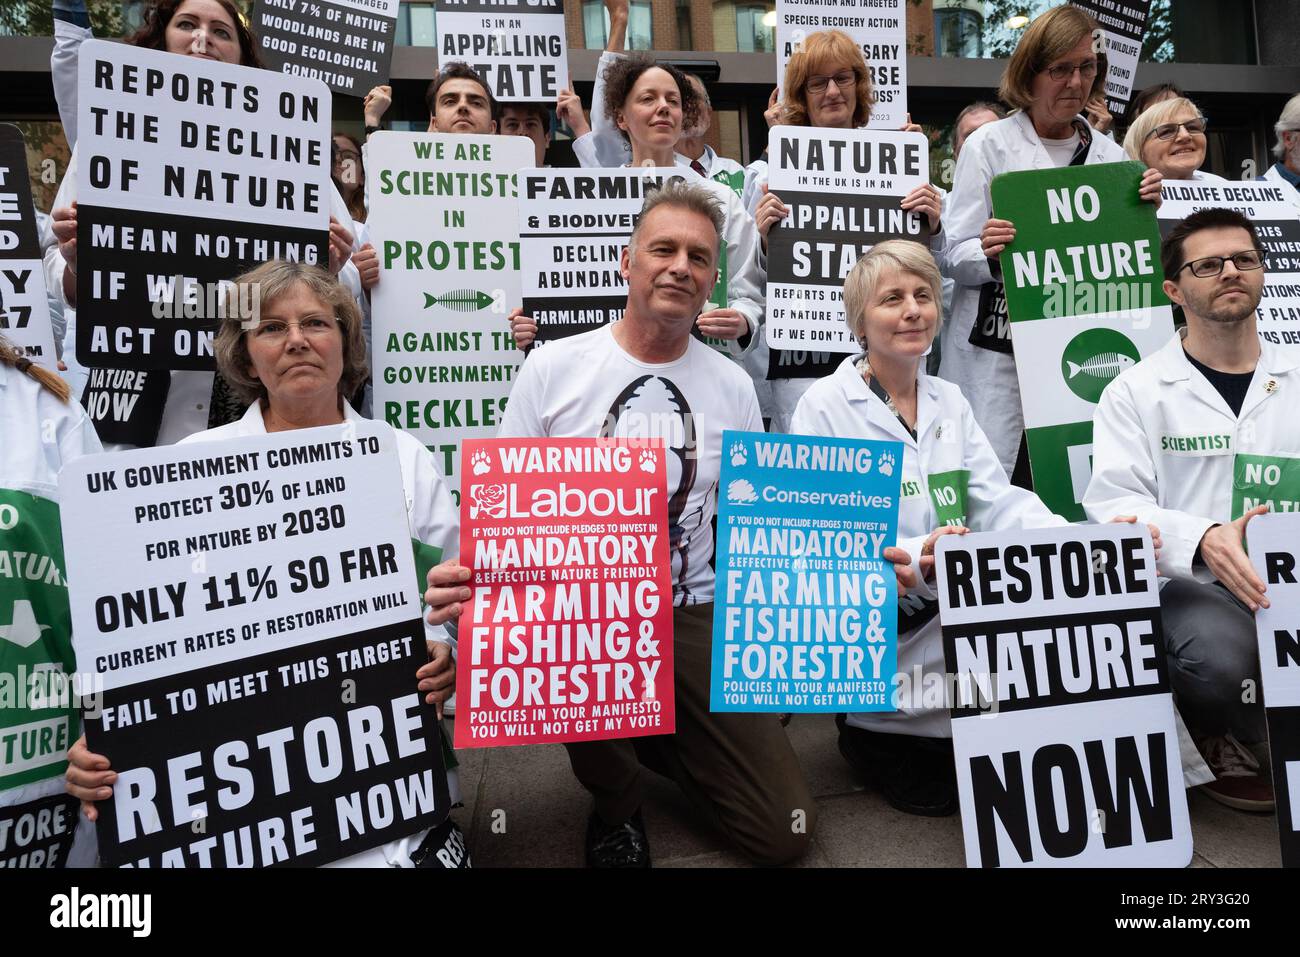 London, UK. 28 September, 2023. Naturalist and TV presenter Chris Packham joins scientists as a coalition of environmental groups rally at the Department for Environment, Food and Rural Affairs calling on government to take action to halt what is described as an 'escalating biodiversity crisis' in the UK. It follows publication of the 'State of Nature' report which assessed the UK is now one of the most nature-depleted countries on Earth, largely due to agricultural practices and climate change. Credit: Ron Fassbender/Alamy Live News Stock Photo